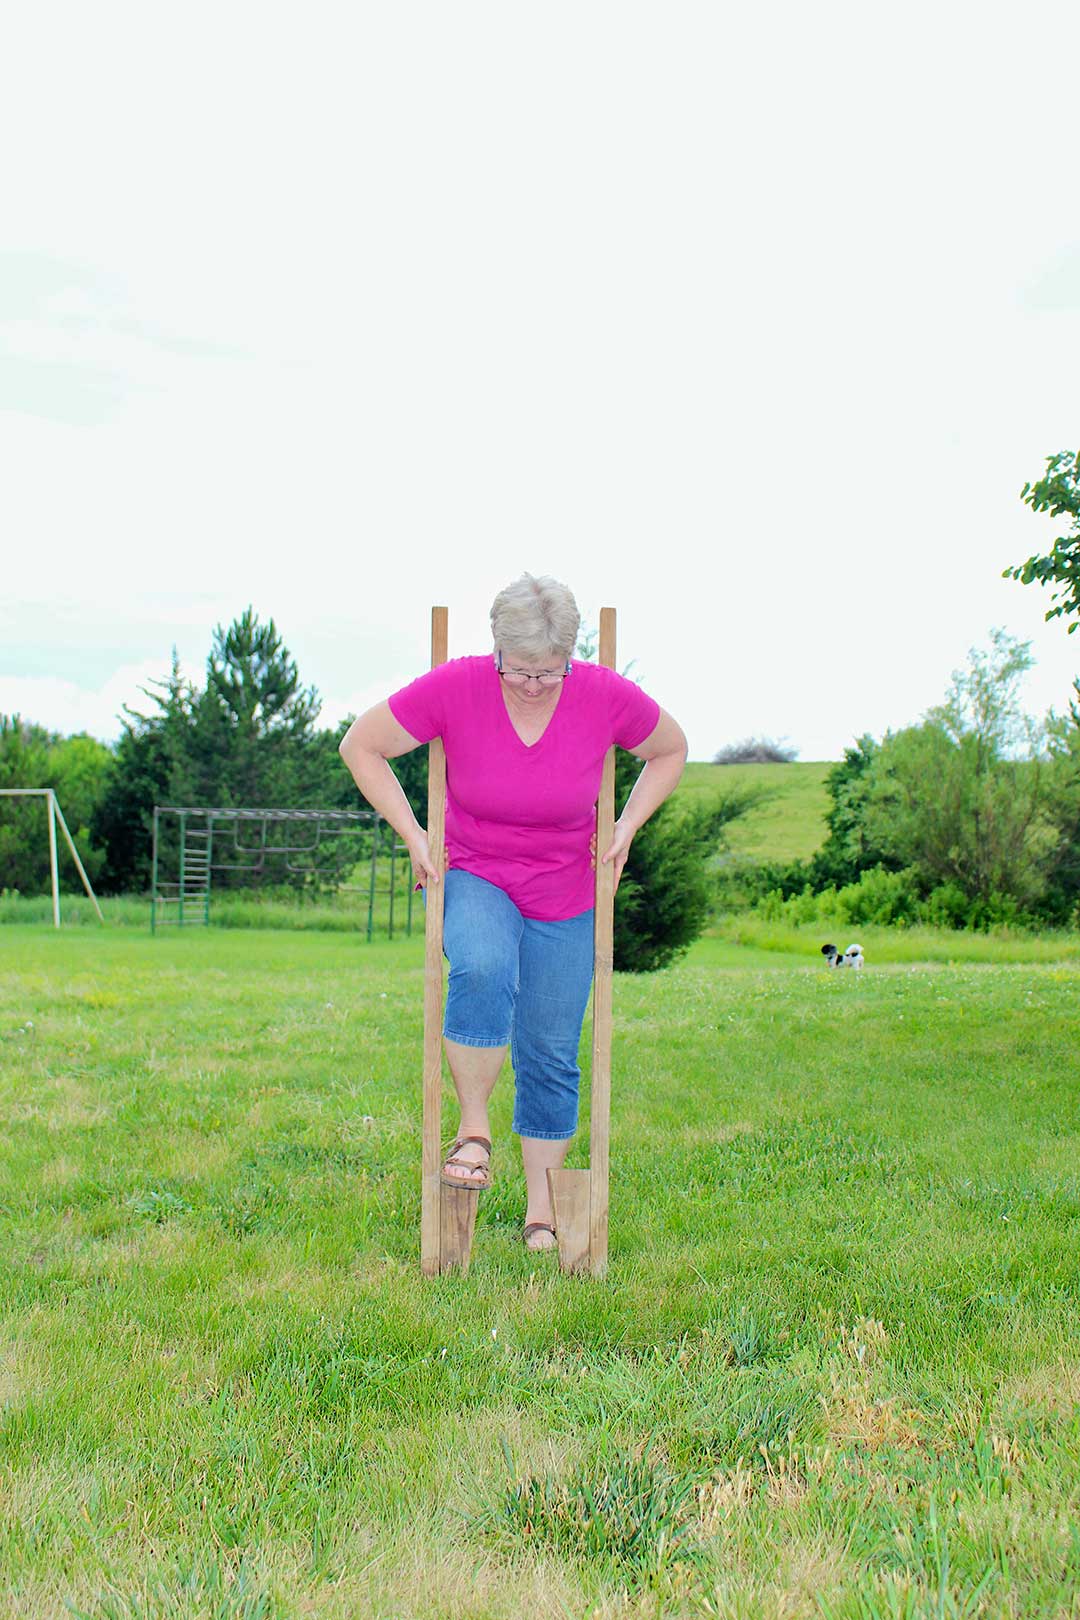 Nana getting up on stilts wearing a bright pink shirt and jeans.